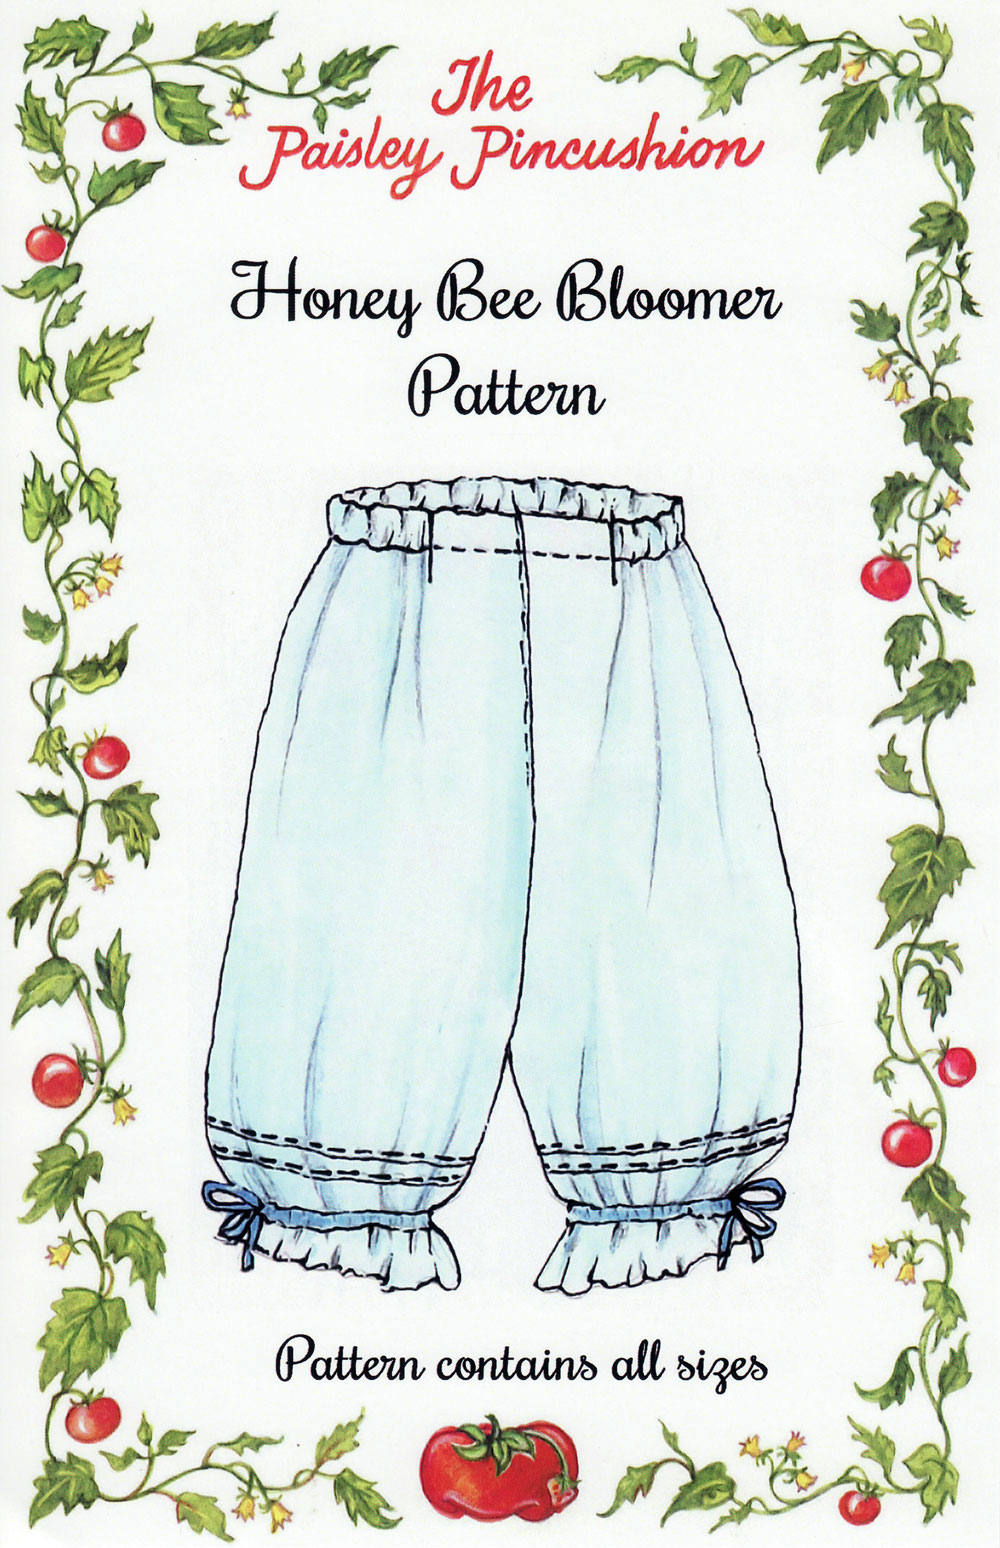 honey-bee-bloomers-sewing-pattern-paisley-pincushion-front